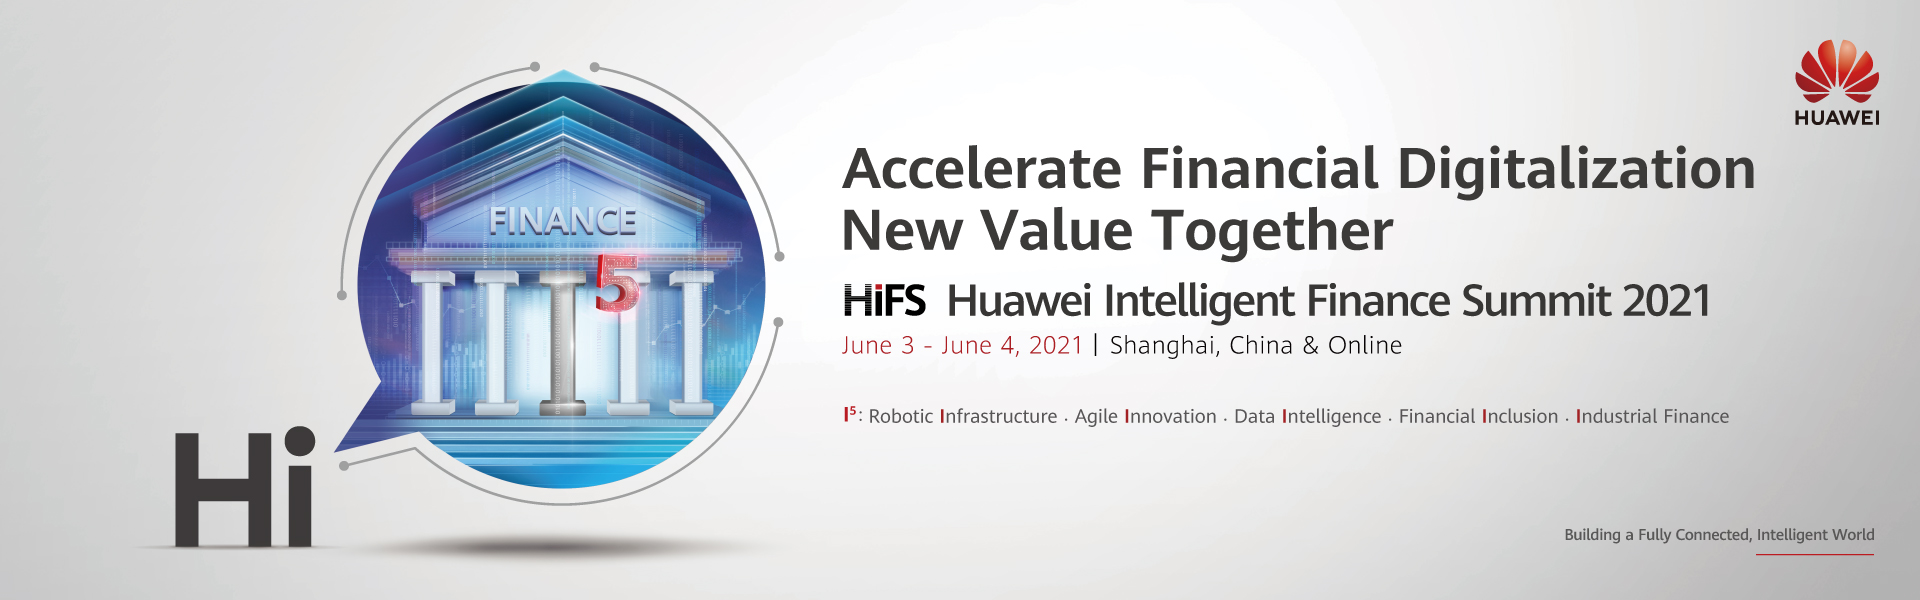 A banner for the Huawei Intelligent Finance Summit 2021, with the key visual depicting the I5 model of financial upgrade